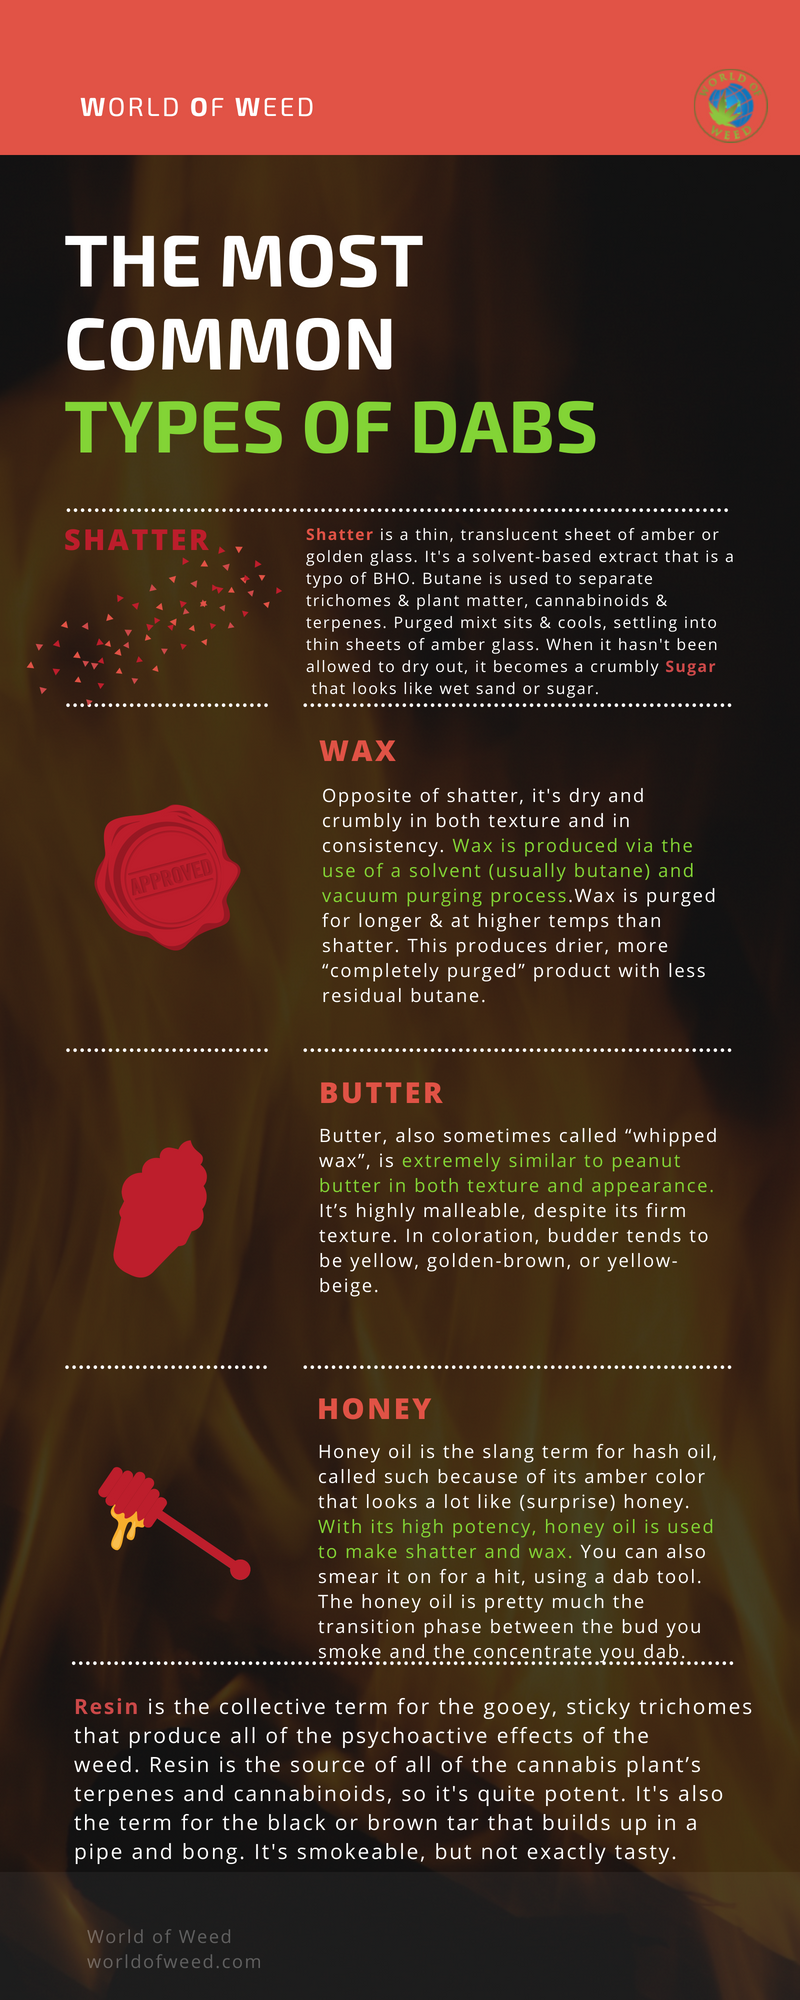 The Most Common Types of Dabs